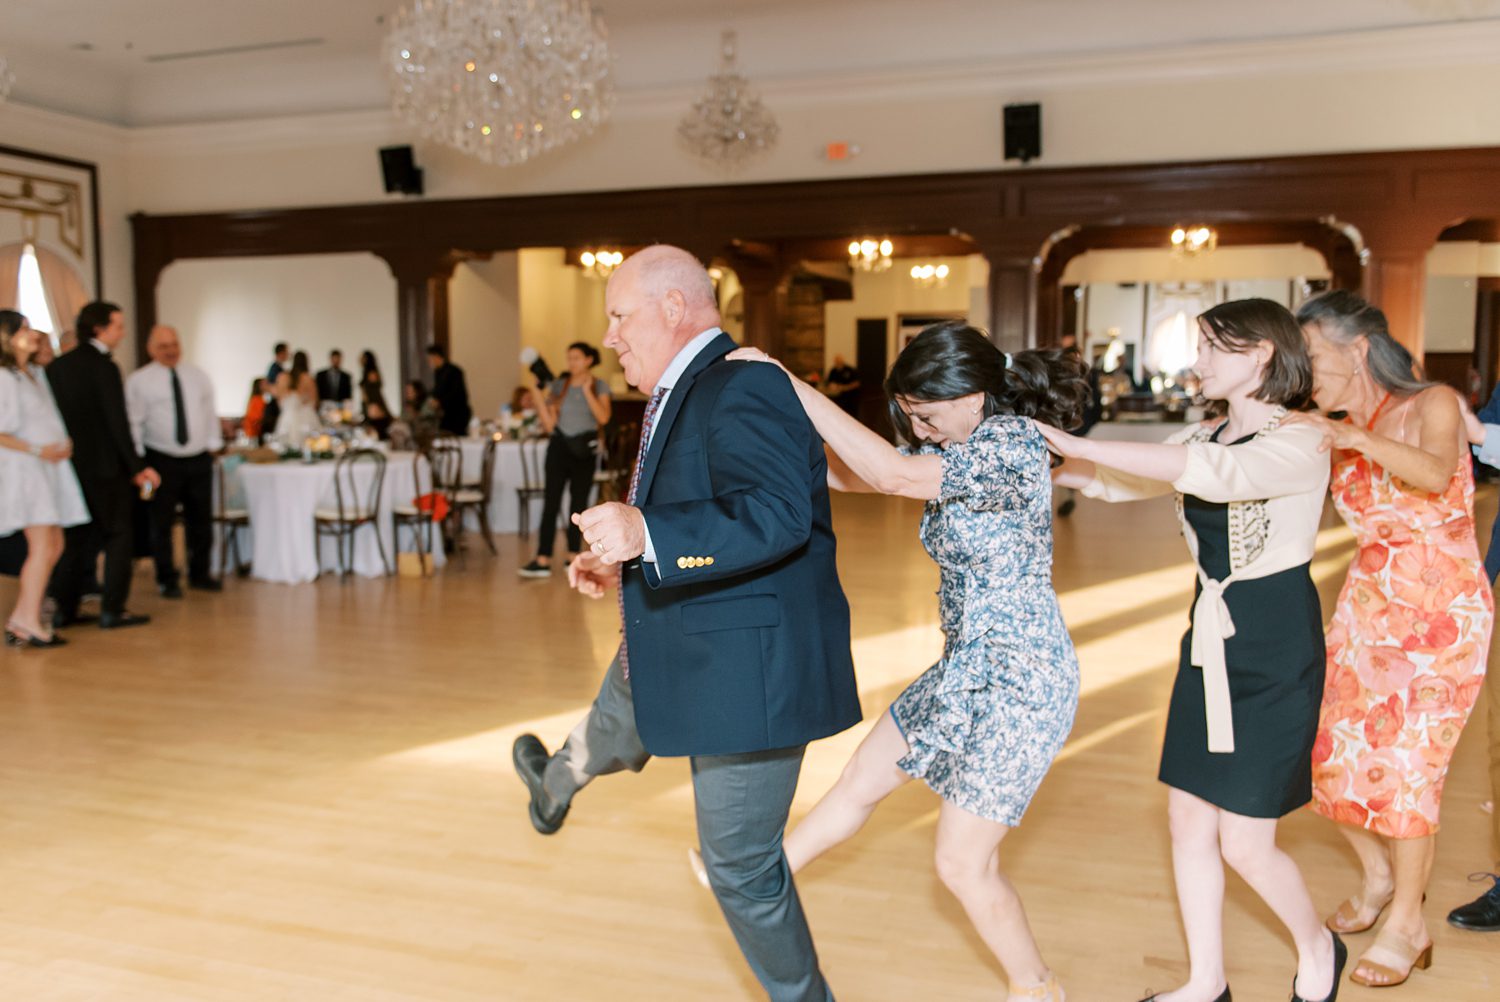 guests dance in conga line during FL wedding reception 